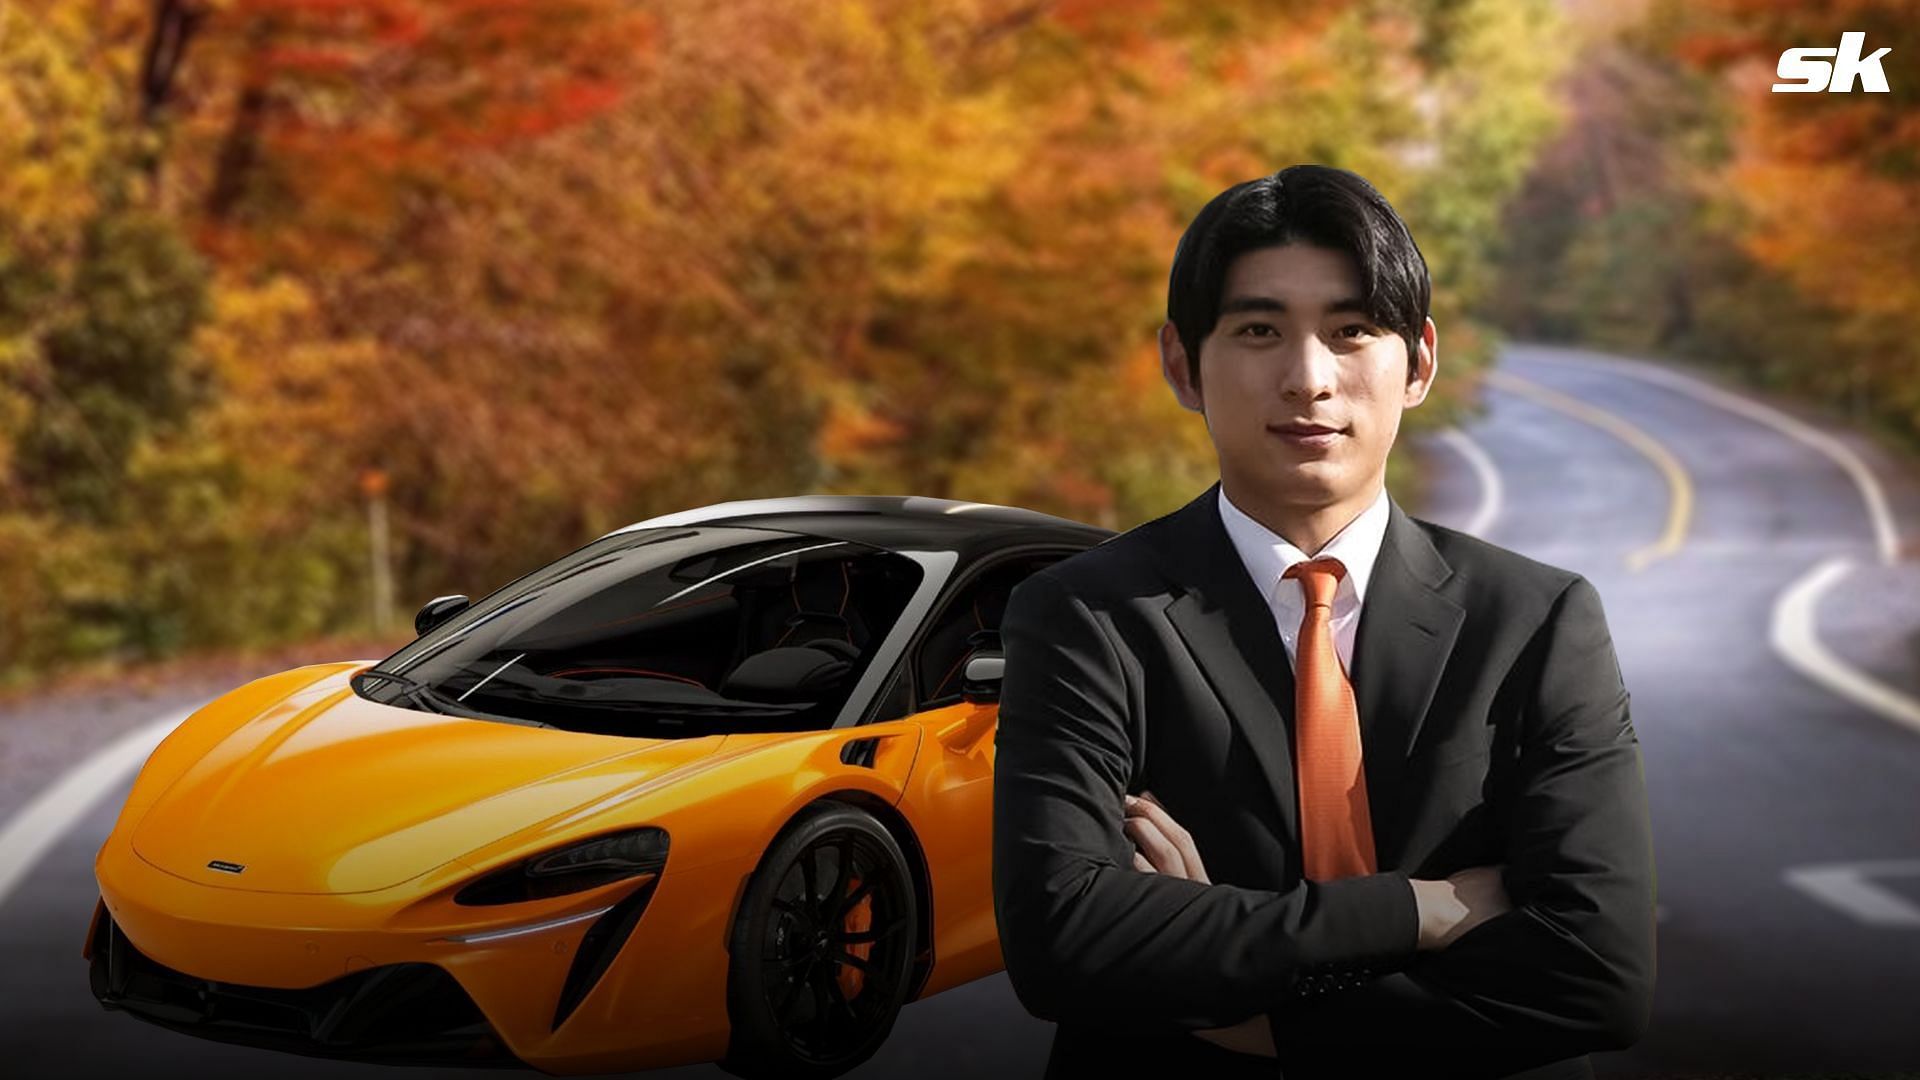 Giants rookie Jung Hoo-Lee takes center stage with $256,308 McLaren Artura for Esquire Korea photoshoot